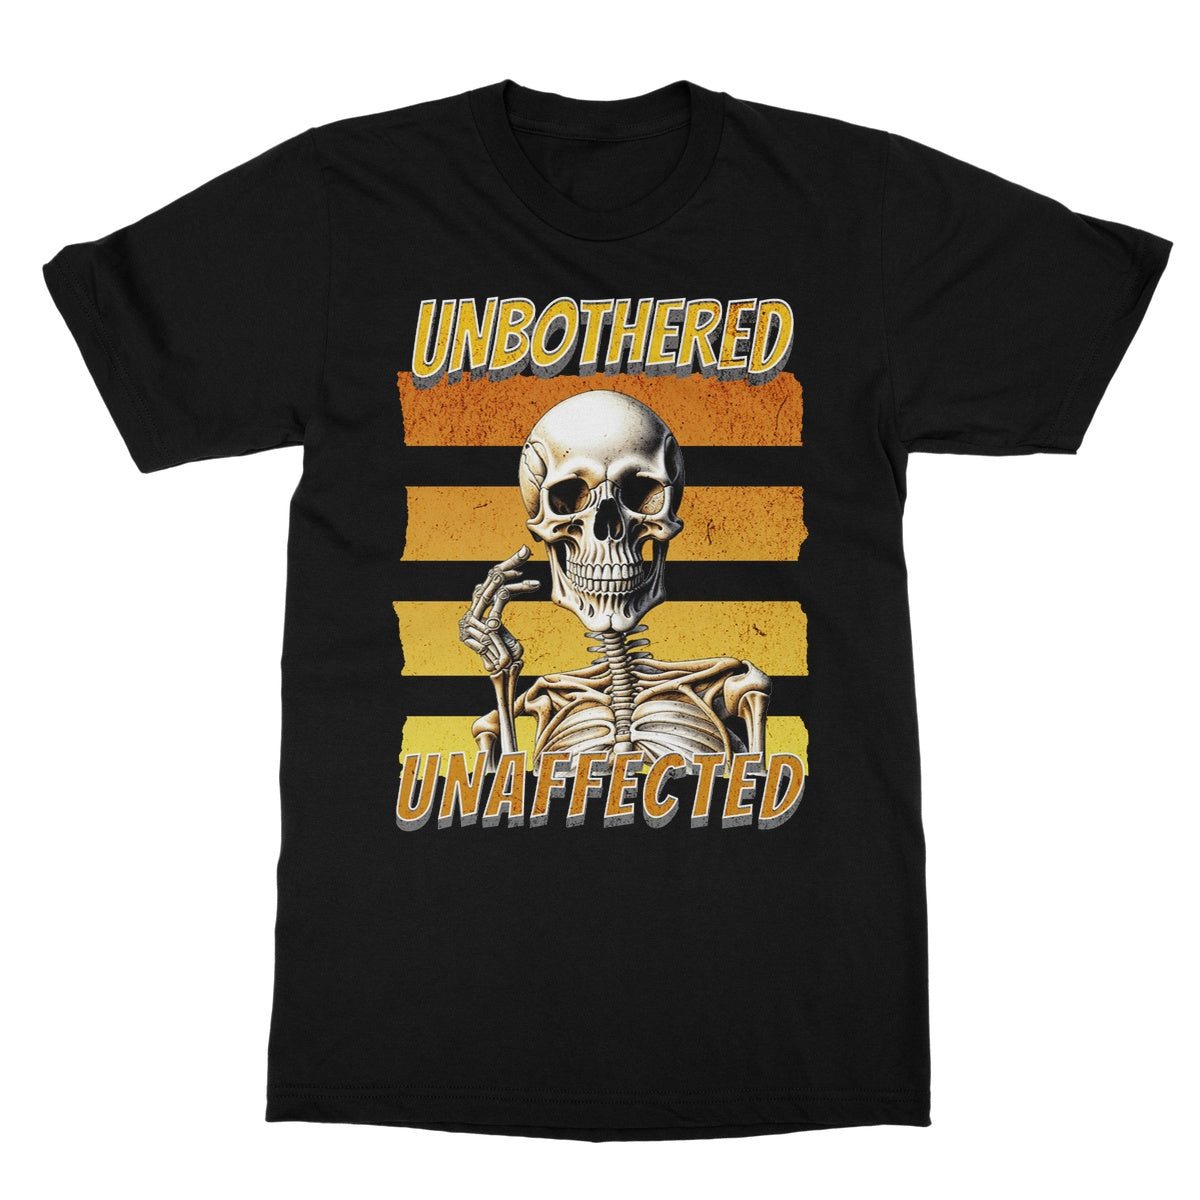 unbothered unaffected t shirt black